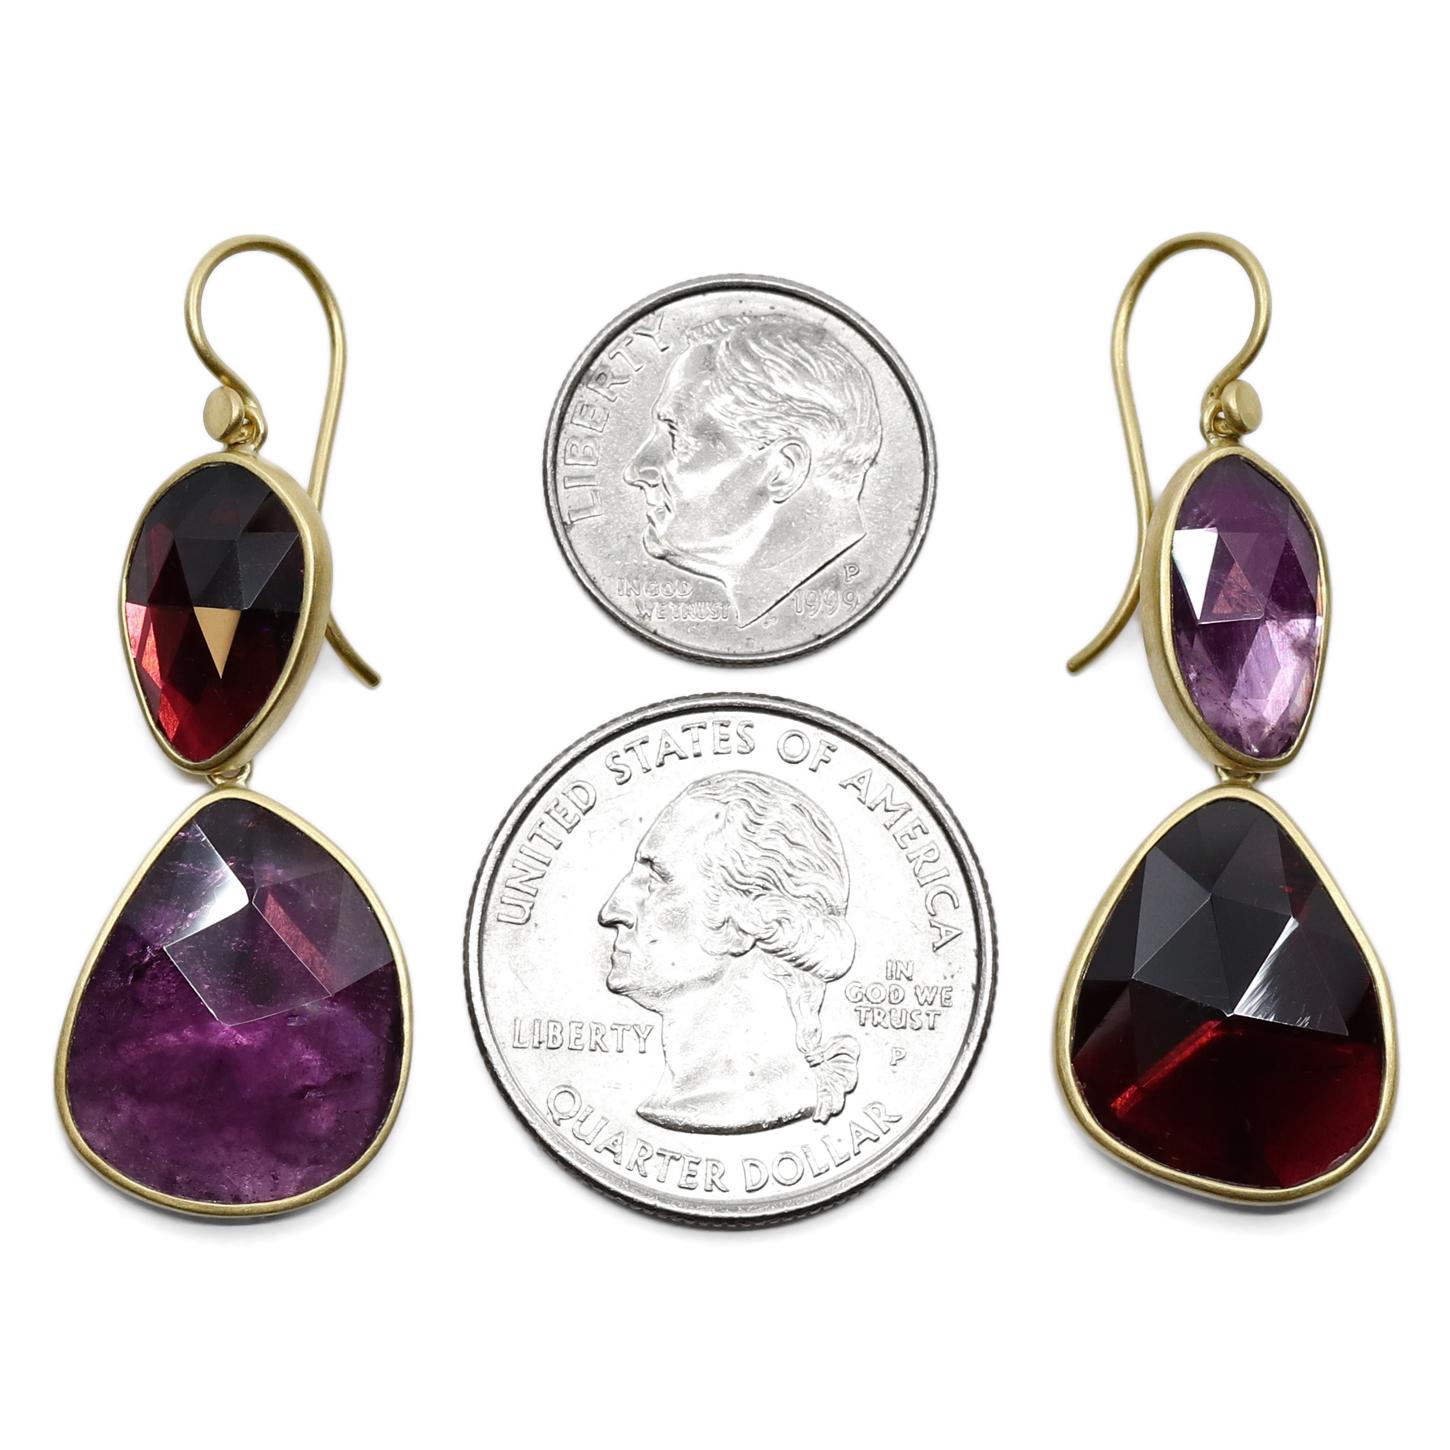 One of a Kind Yin Yang Dangle Drop Earrings by renowned jewelry maker Lola Brooks hand-fabricated in matte-finished 18k yellow gold featuring gorgeous pairs of shimmering rose-cut red and pink tourmaline, individually bezel-set opposite one another